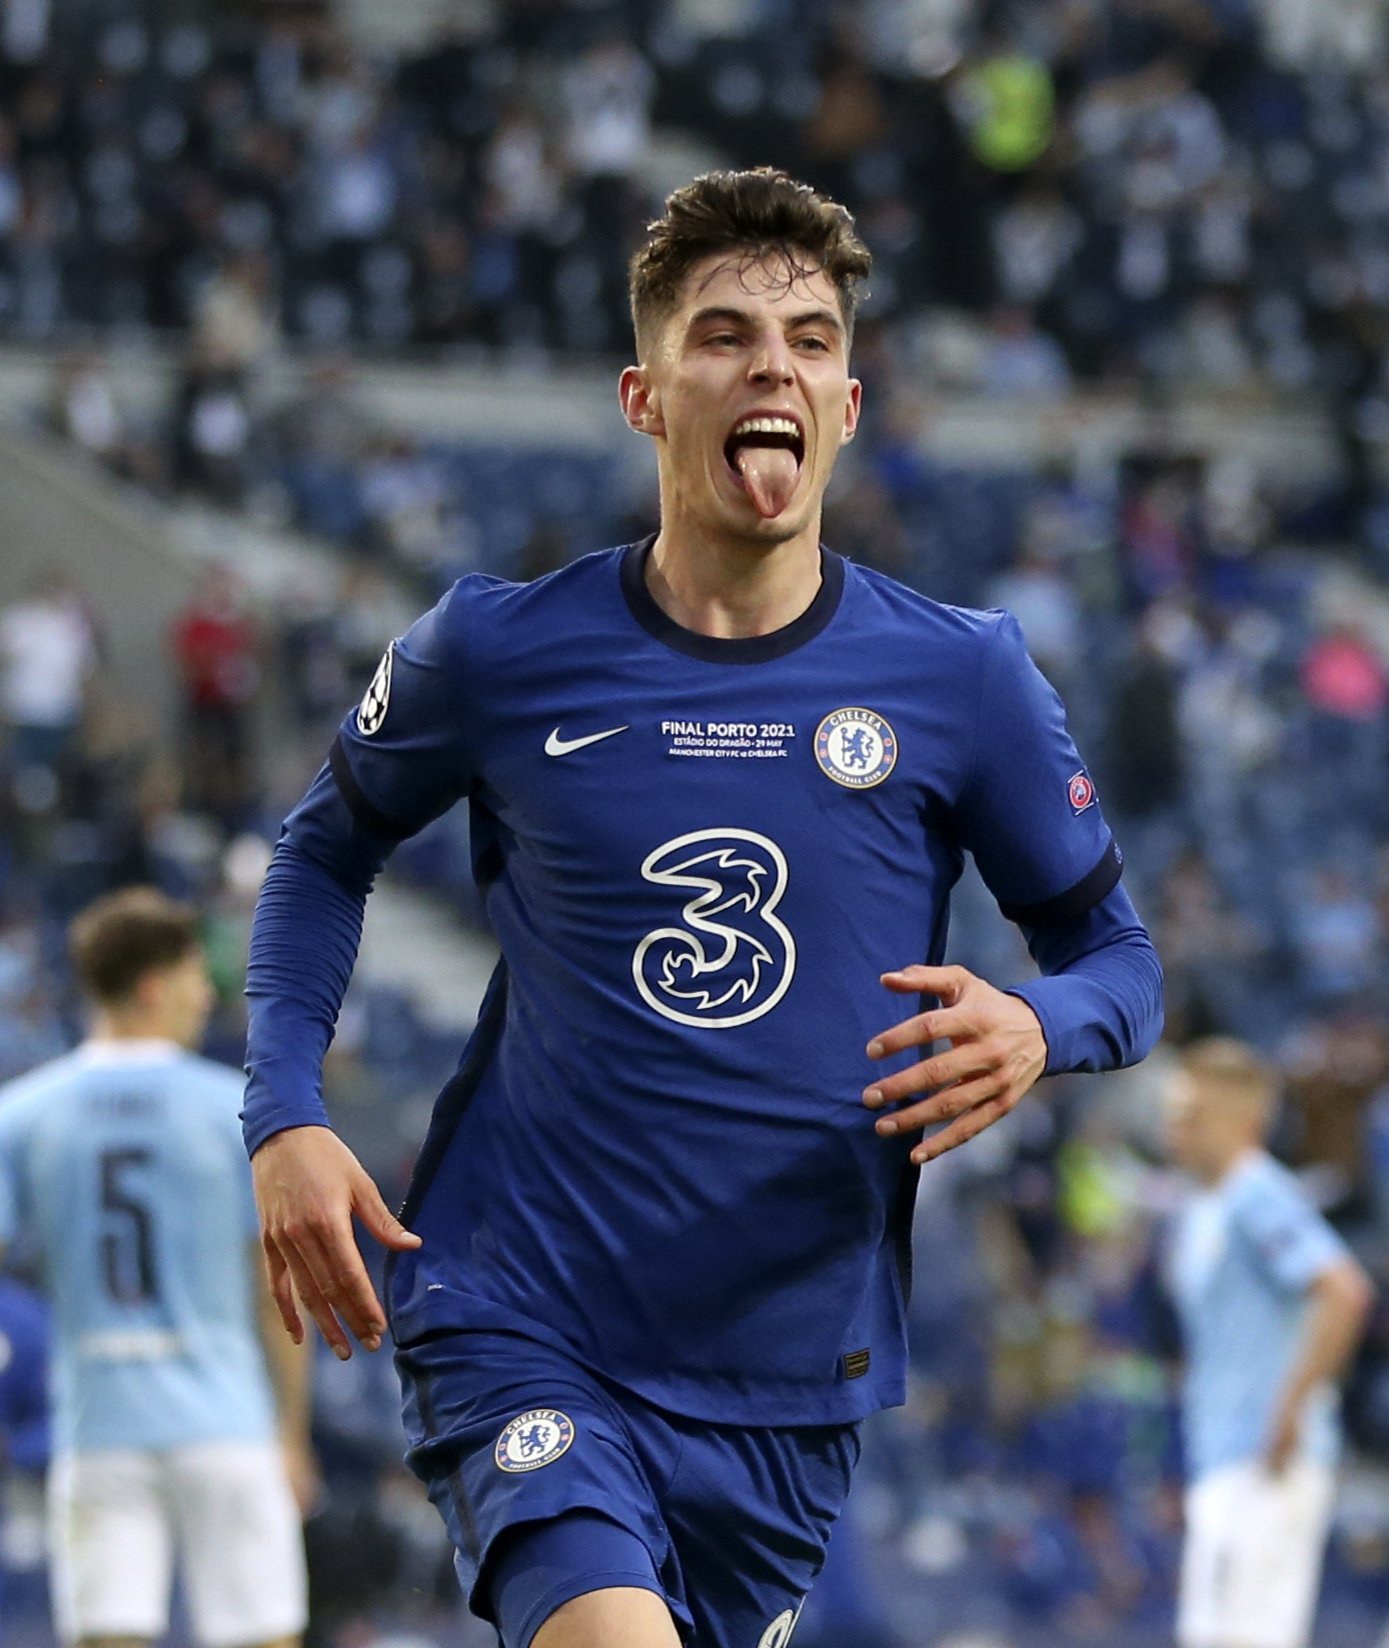 Chelsea's Kai Havertz celebrates after scoring a goal during the Champions League final match against Manchester City at Dragao Stadium in Porto, Portugal, May 29, 2021. (AP Photo)